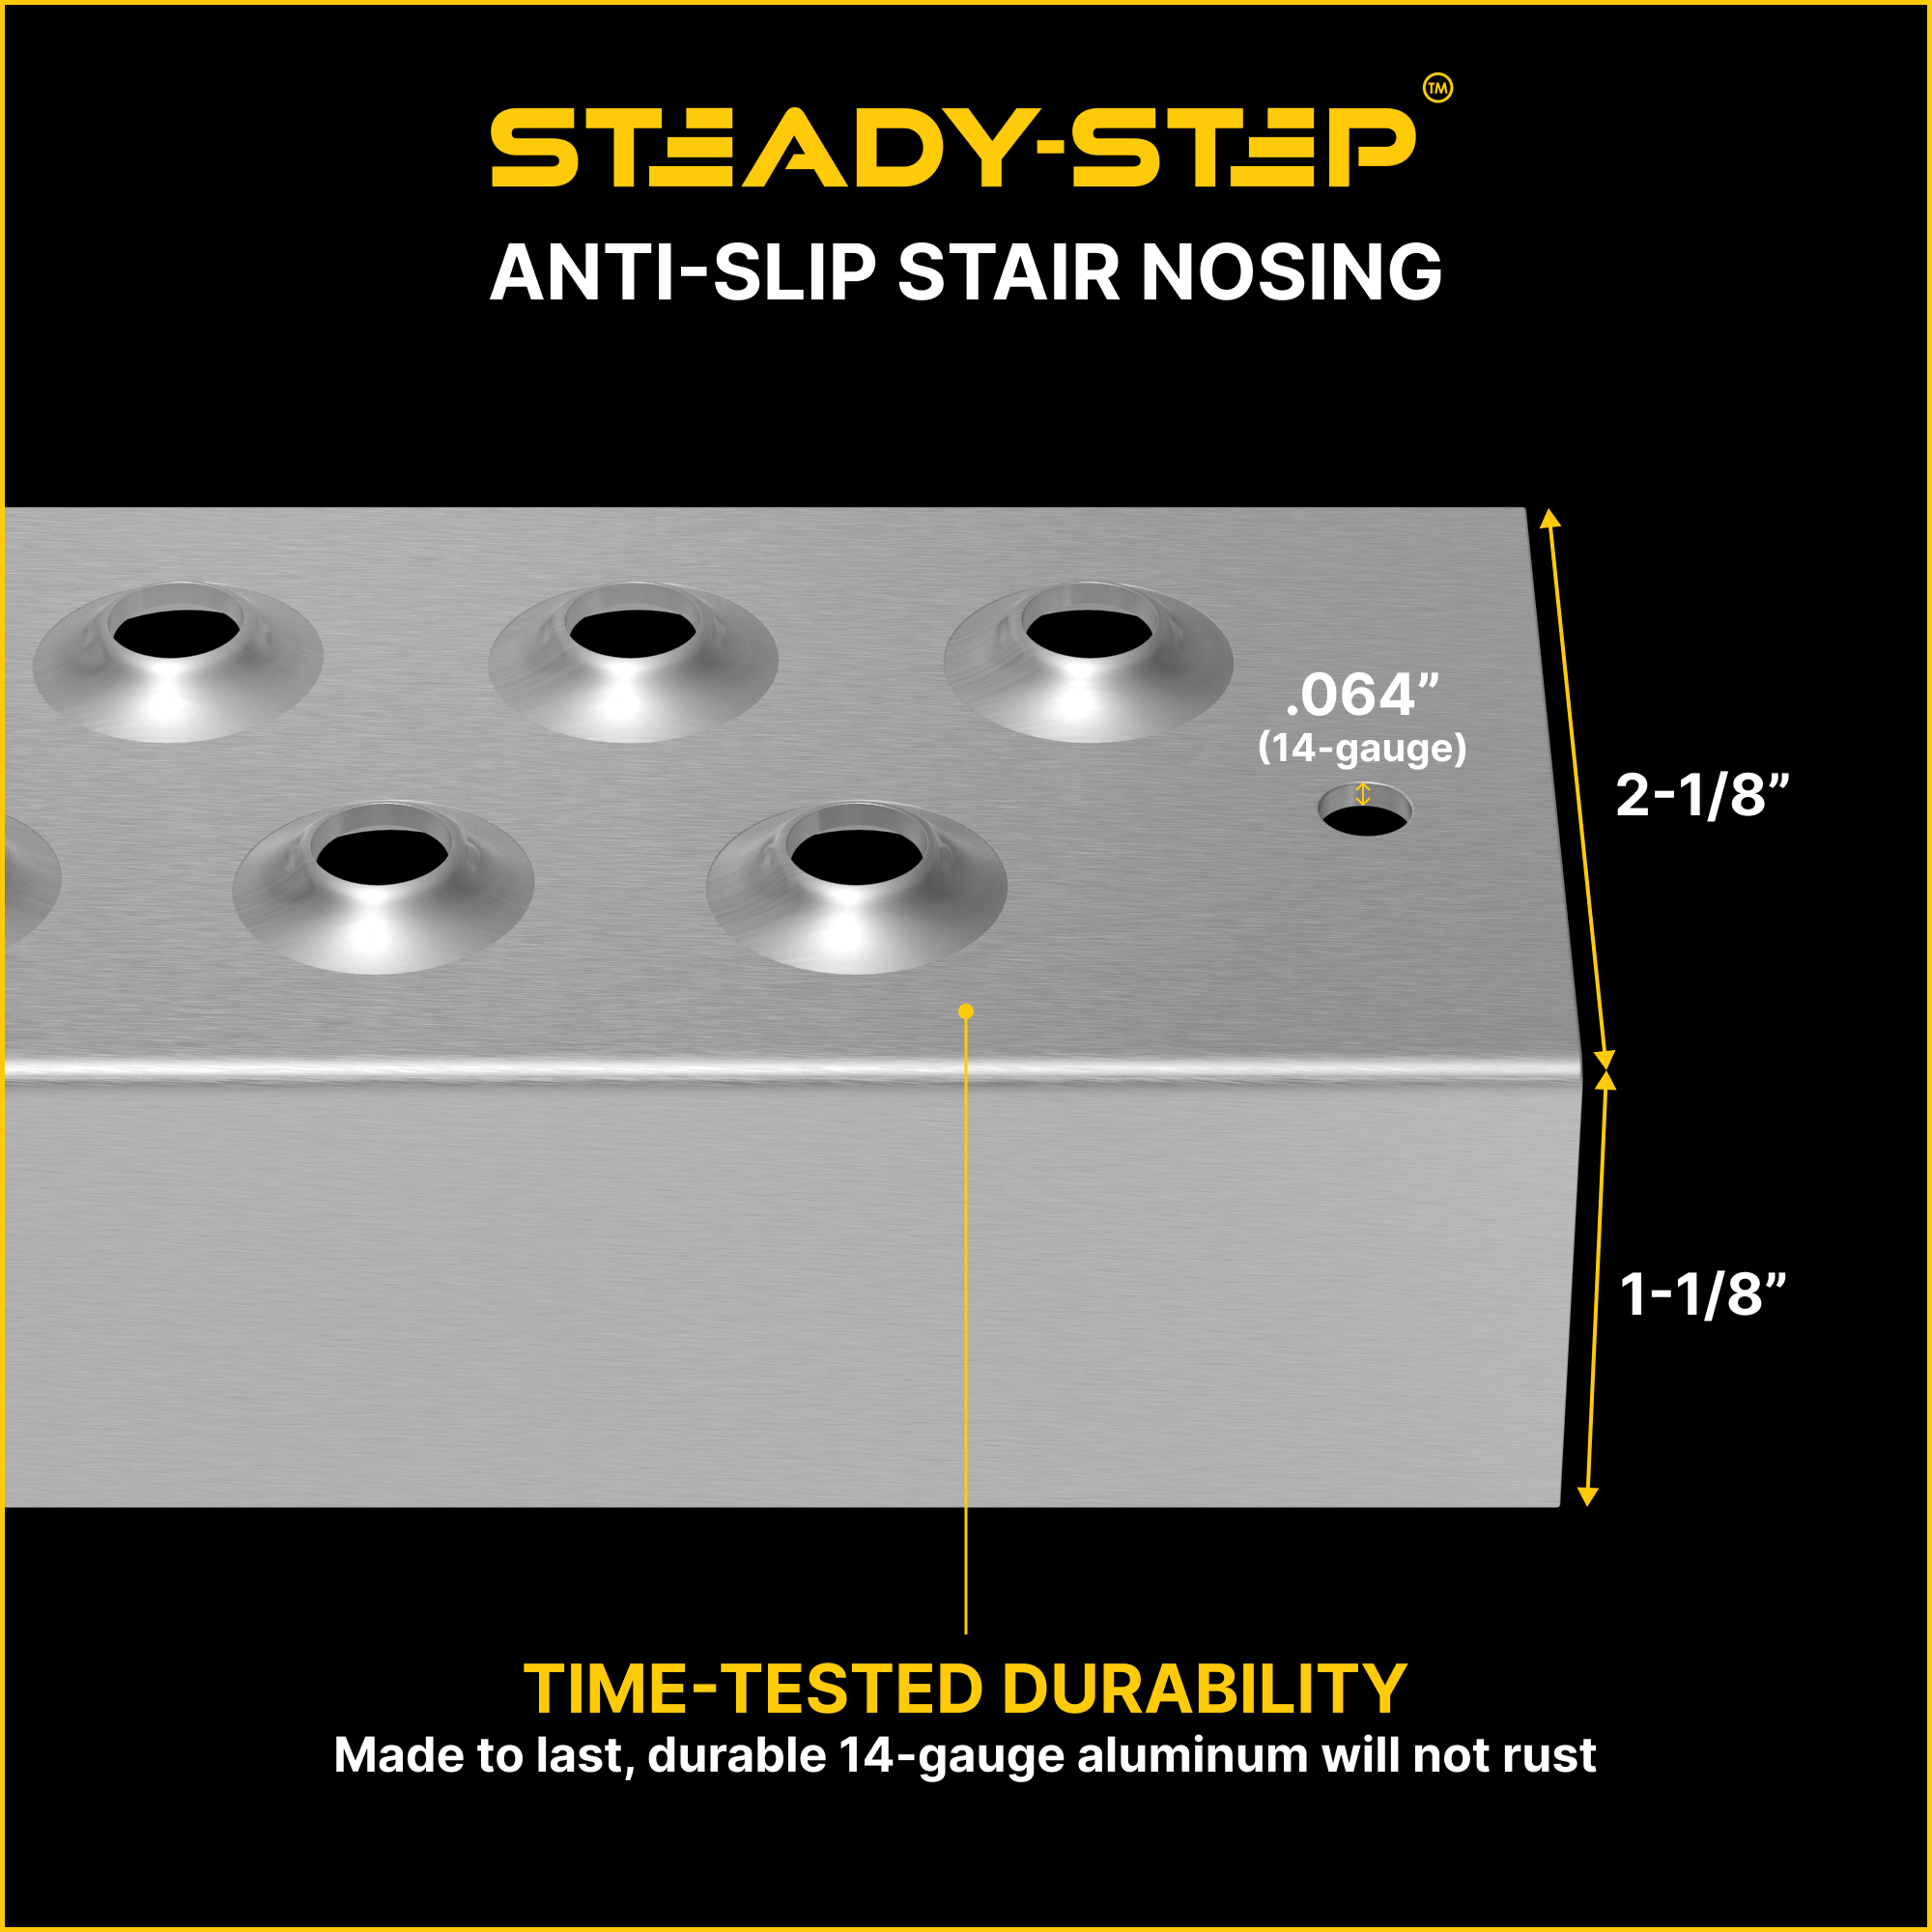 Anti-Slip Stair Nosing for Outdoor Stairs - Durable Aluminum